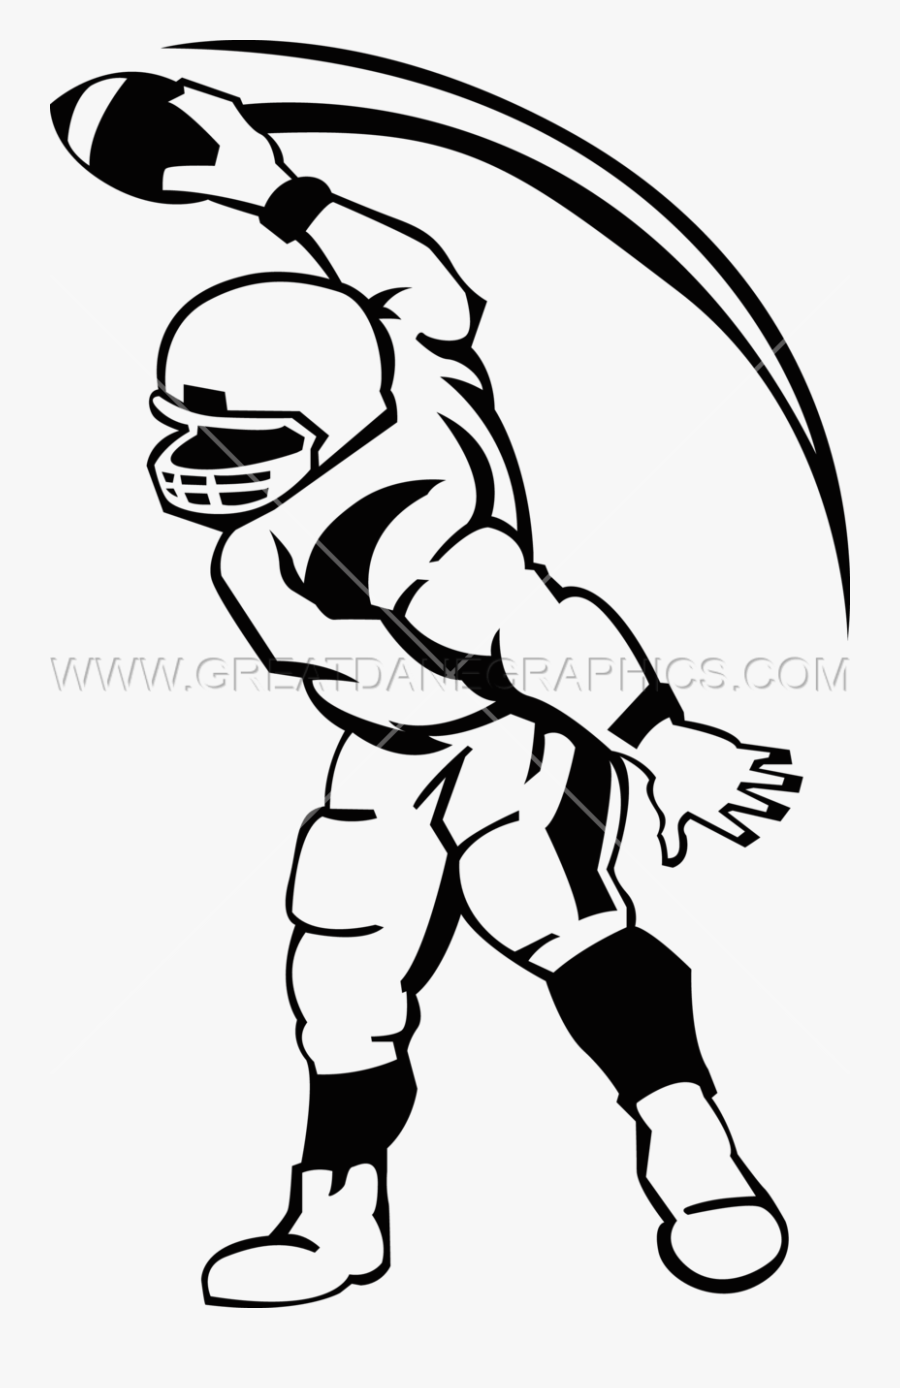 Player Touchdown Production Ready - Football Player Making A Touchdown Drawing, Transparent Clipart